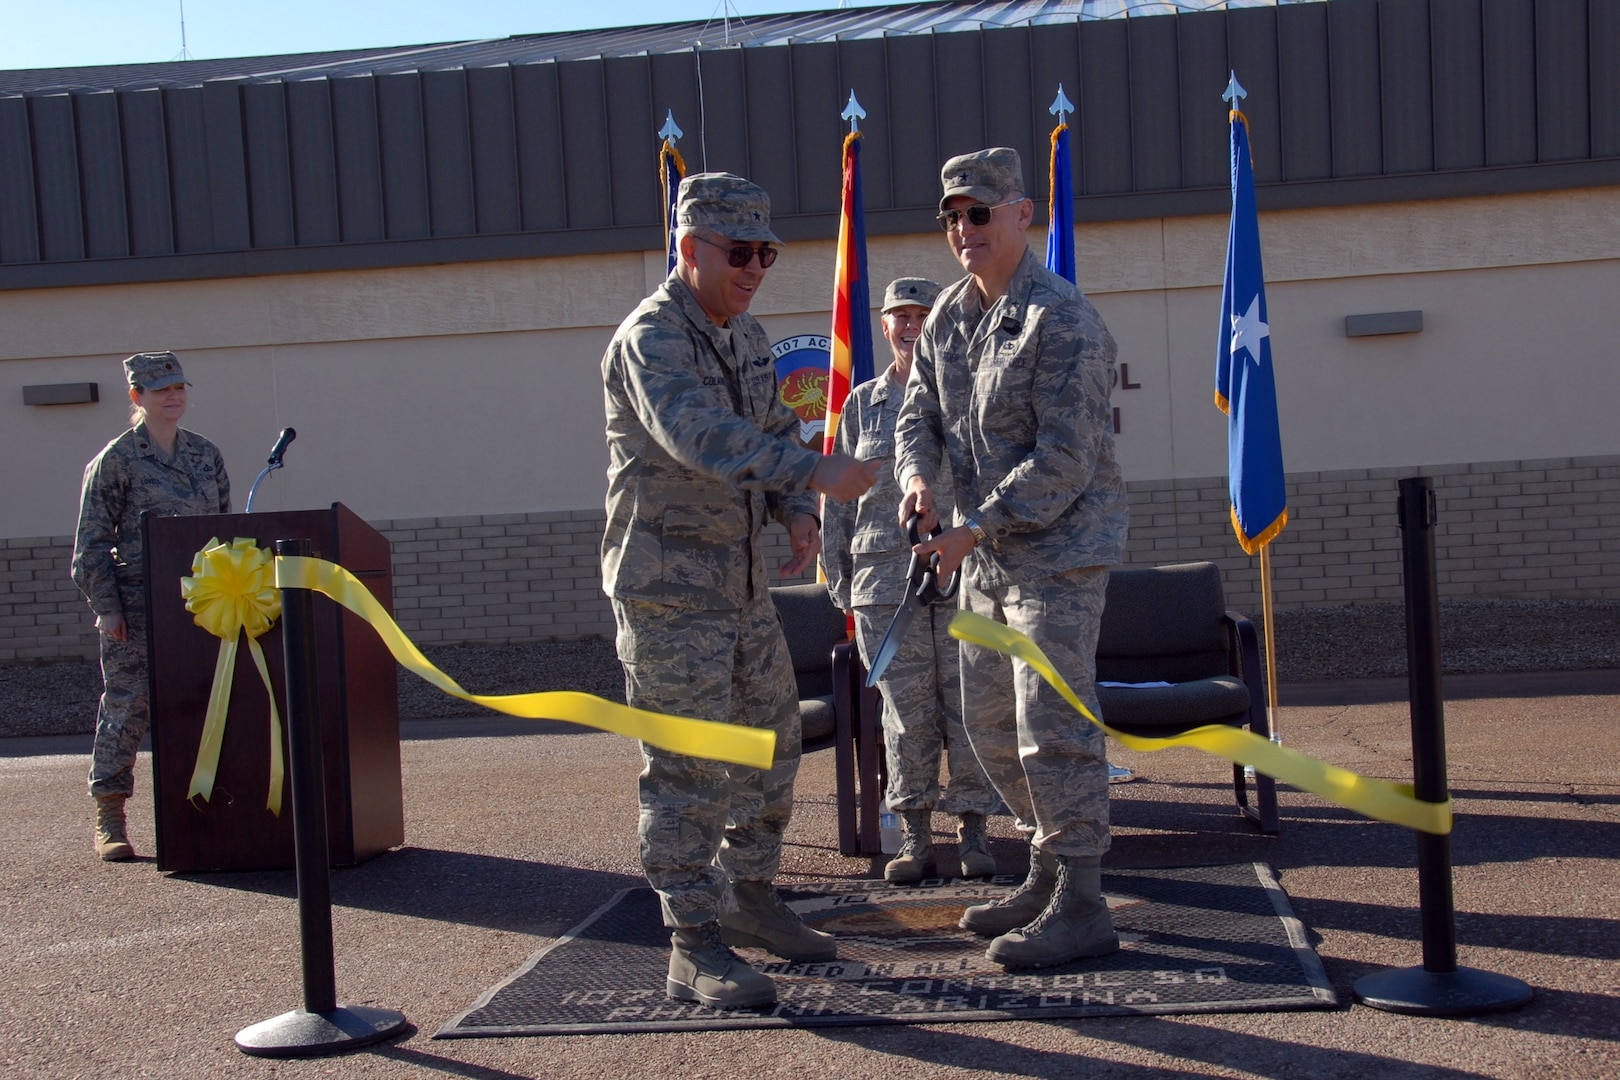 Brig. Gen. Michael Colangelo, Commander Ariz. Air National Guard, and Brig. Gen. Kurt Neubauer, Commander 56th Fighter Wing, cut the ribbon for the relocation of the 107th Air Control Squadron at Luke Air Force Base, Ariz, while Maj. Lynda Lovell and Lt. Col. Pamela Jackson, Commander 107th Air Control Squadron look on.